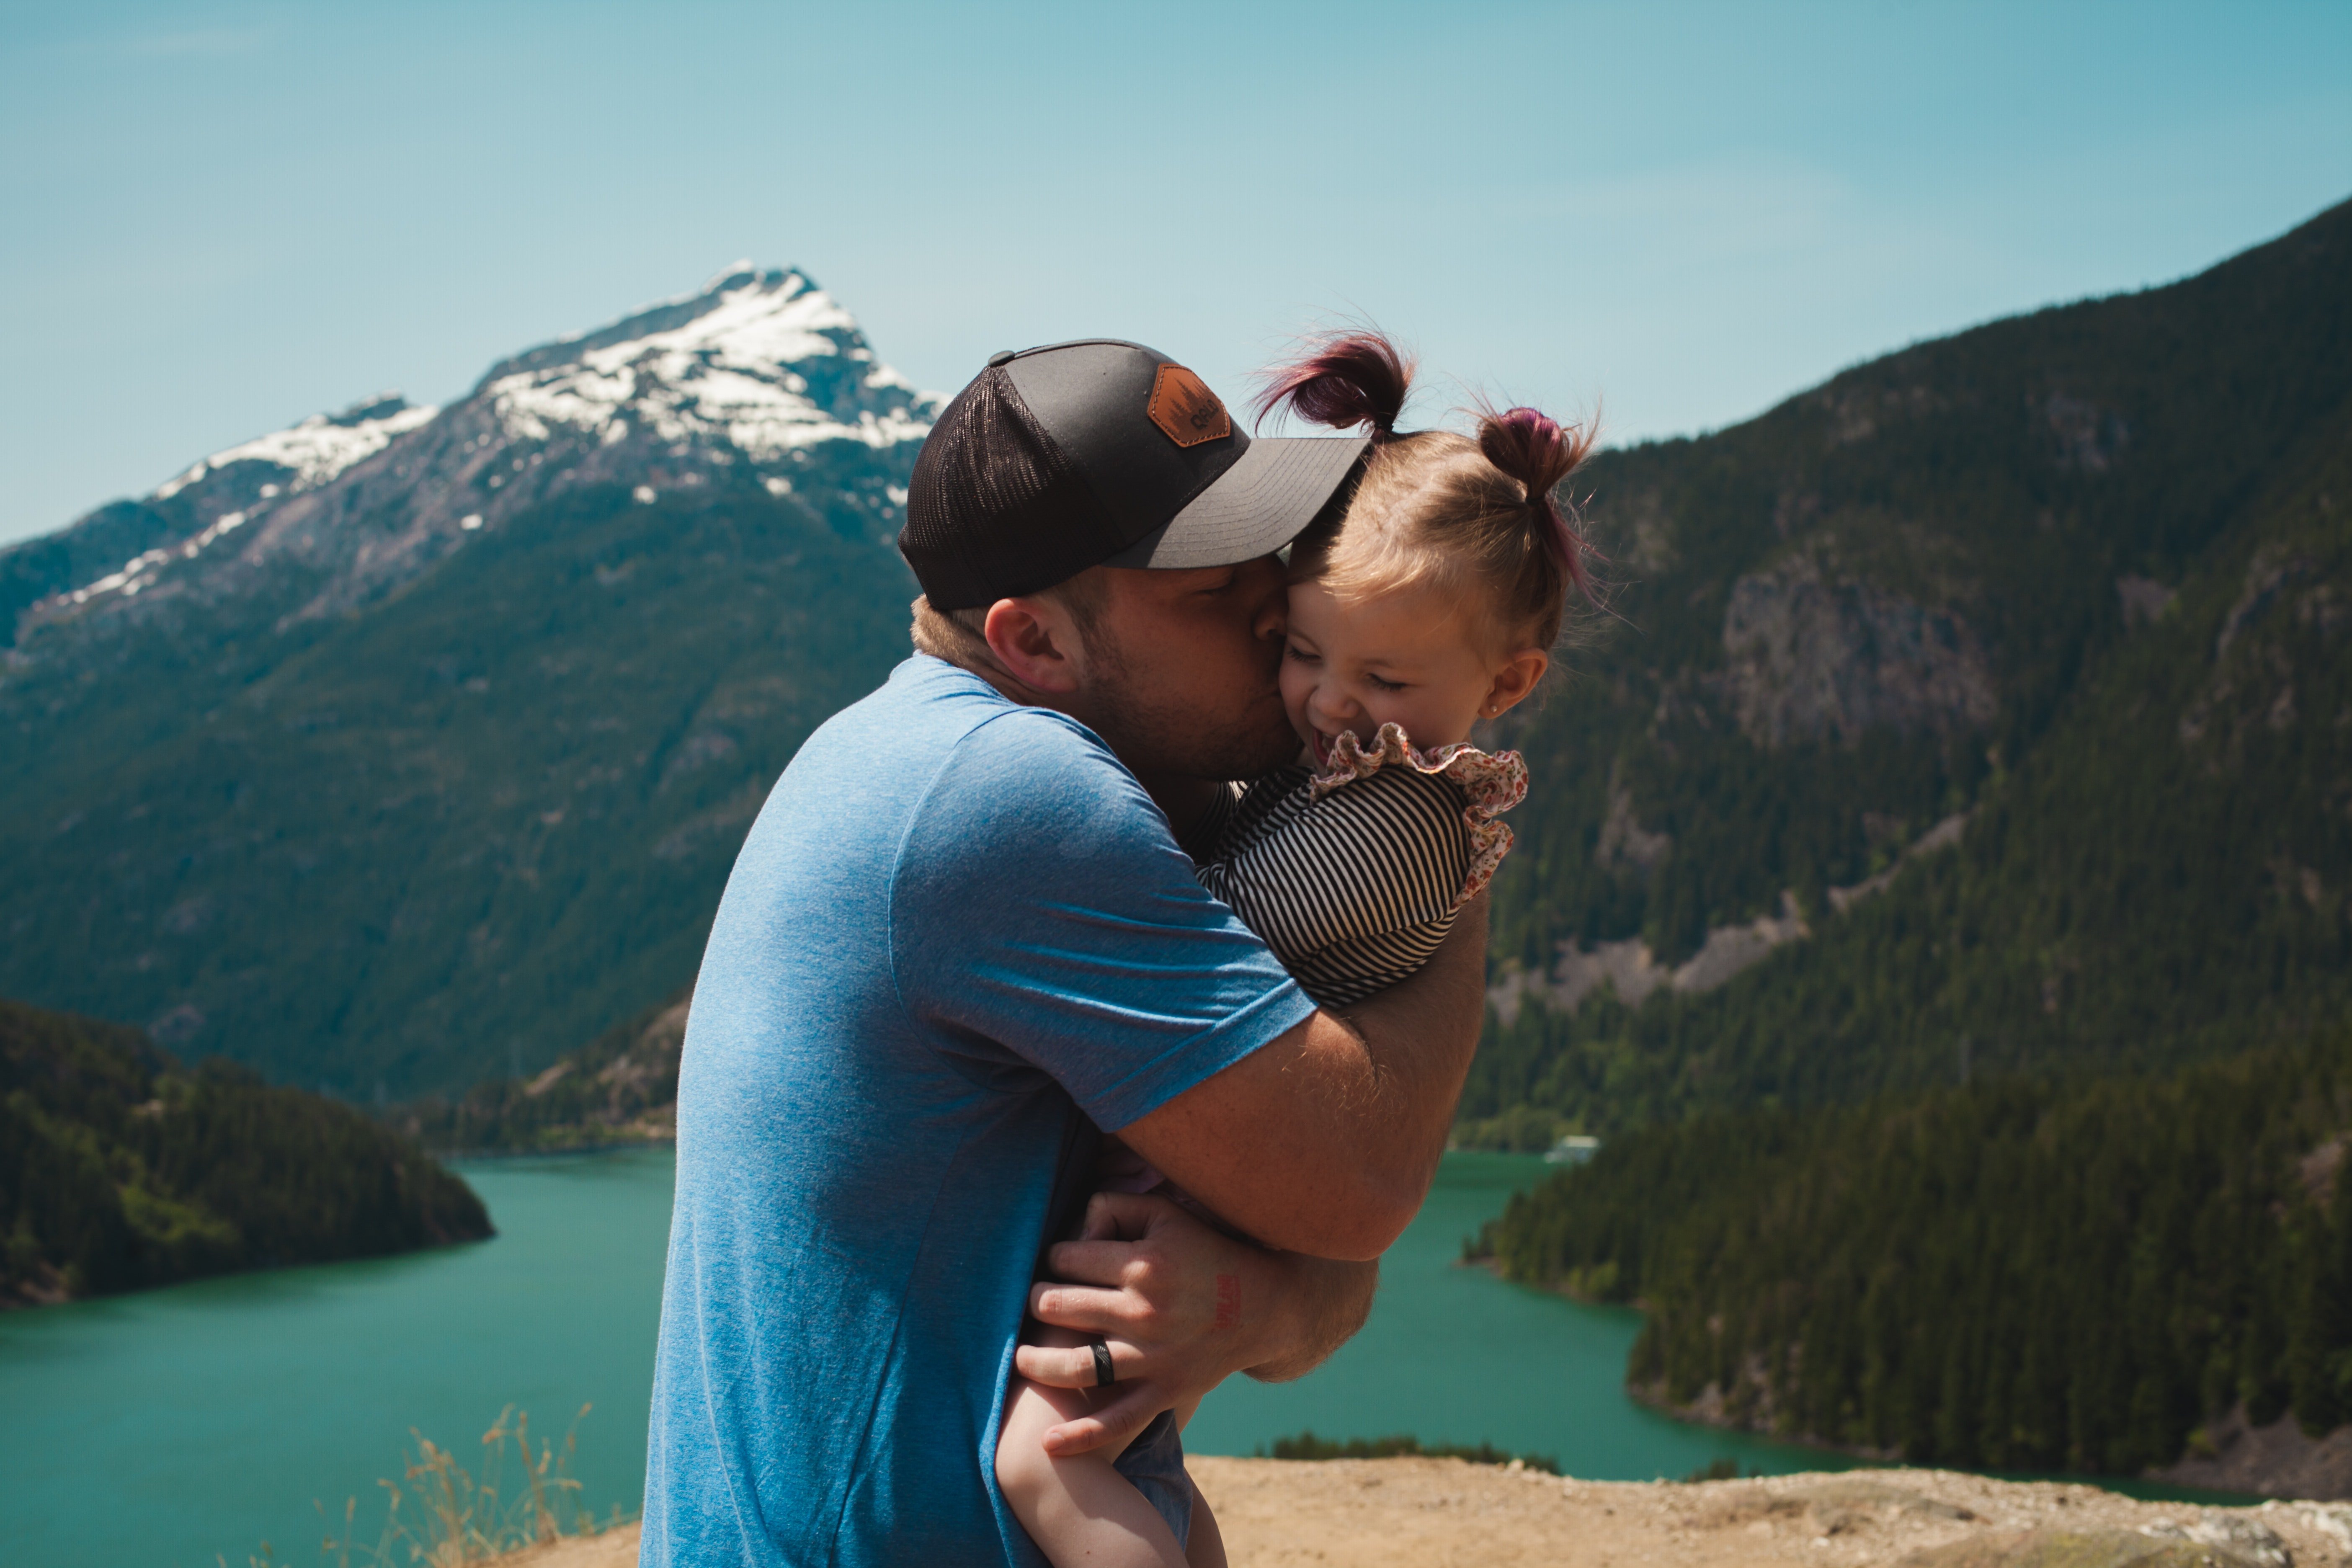 Amid the questionable future of his marriage, OP found solace in his daughter. | Source: Pexels